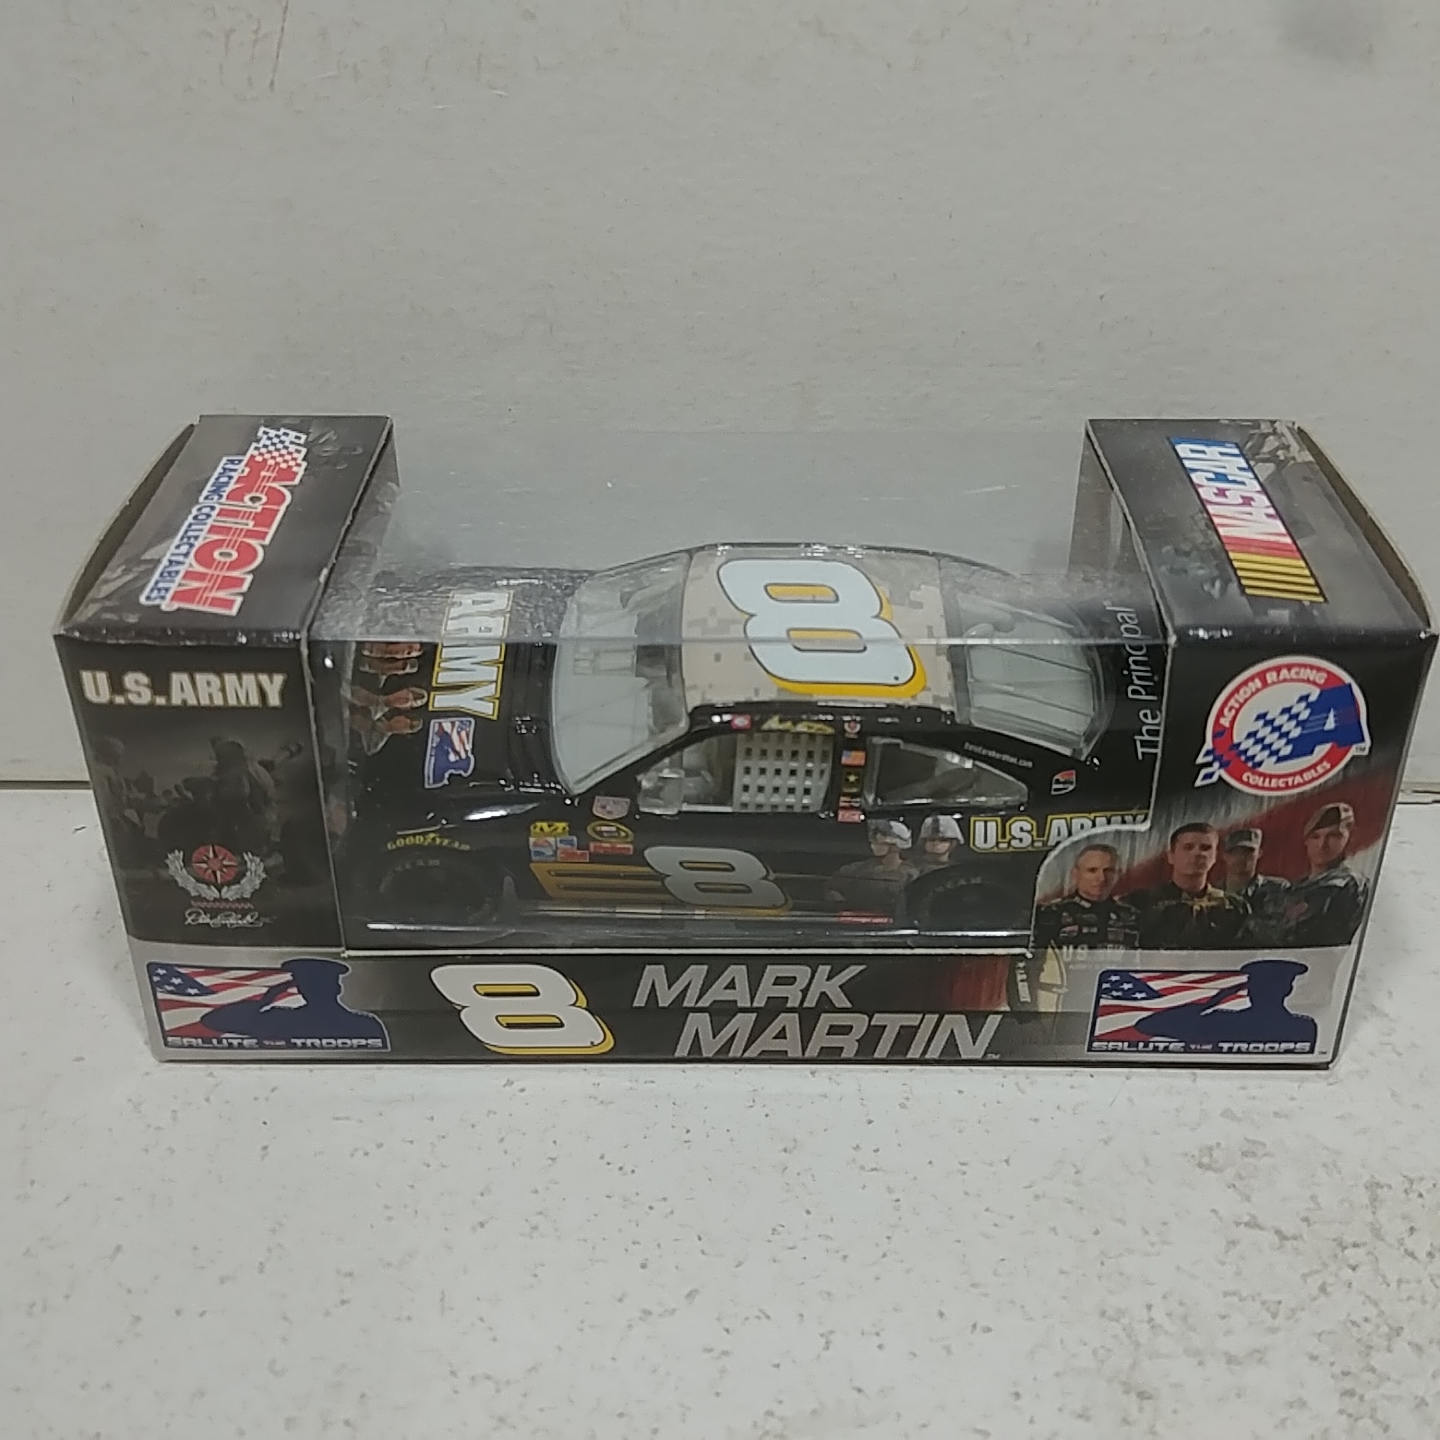 2008 Matk Martin 1/64th Army "Salute the Troops" Pitstop Series car